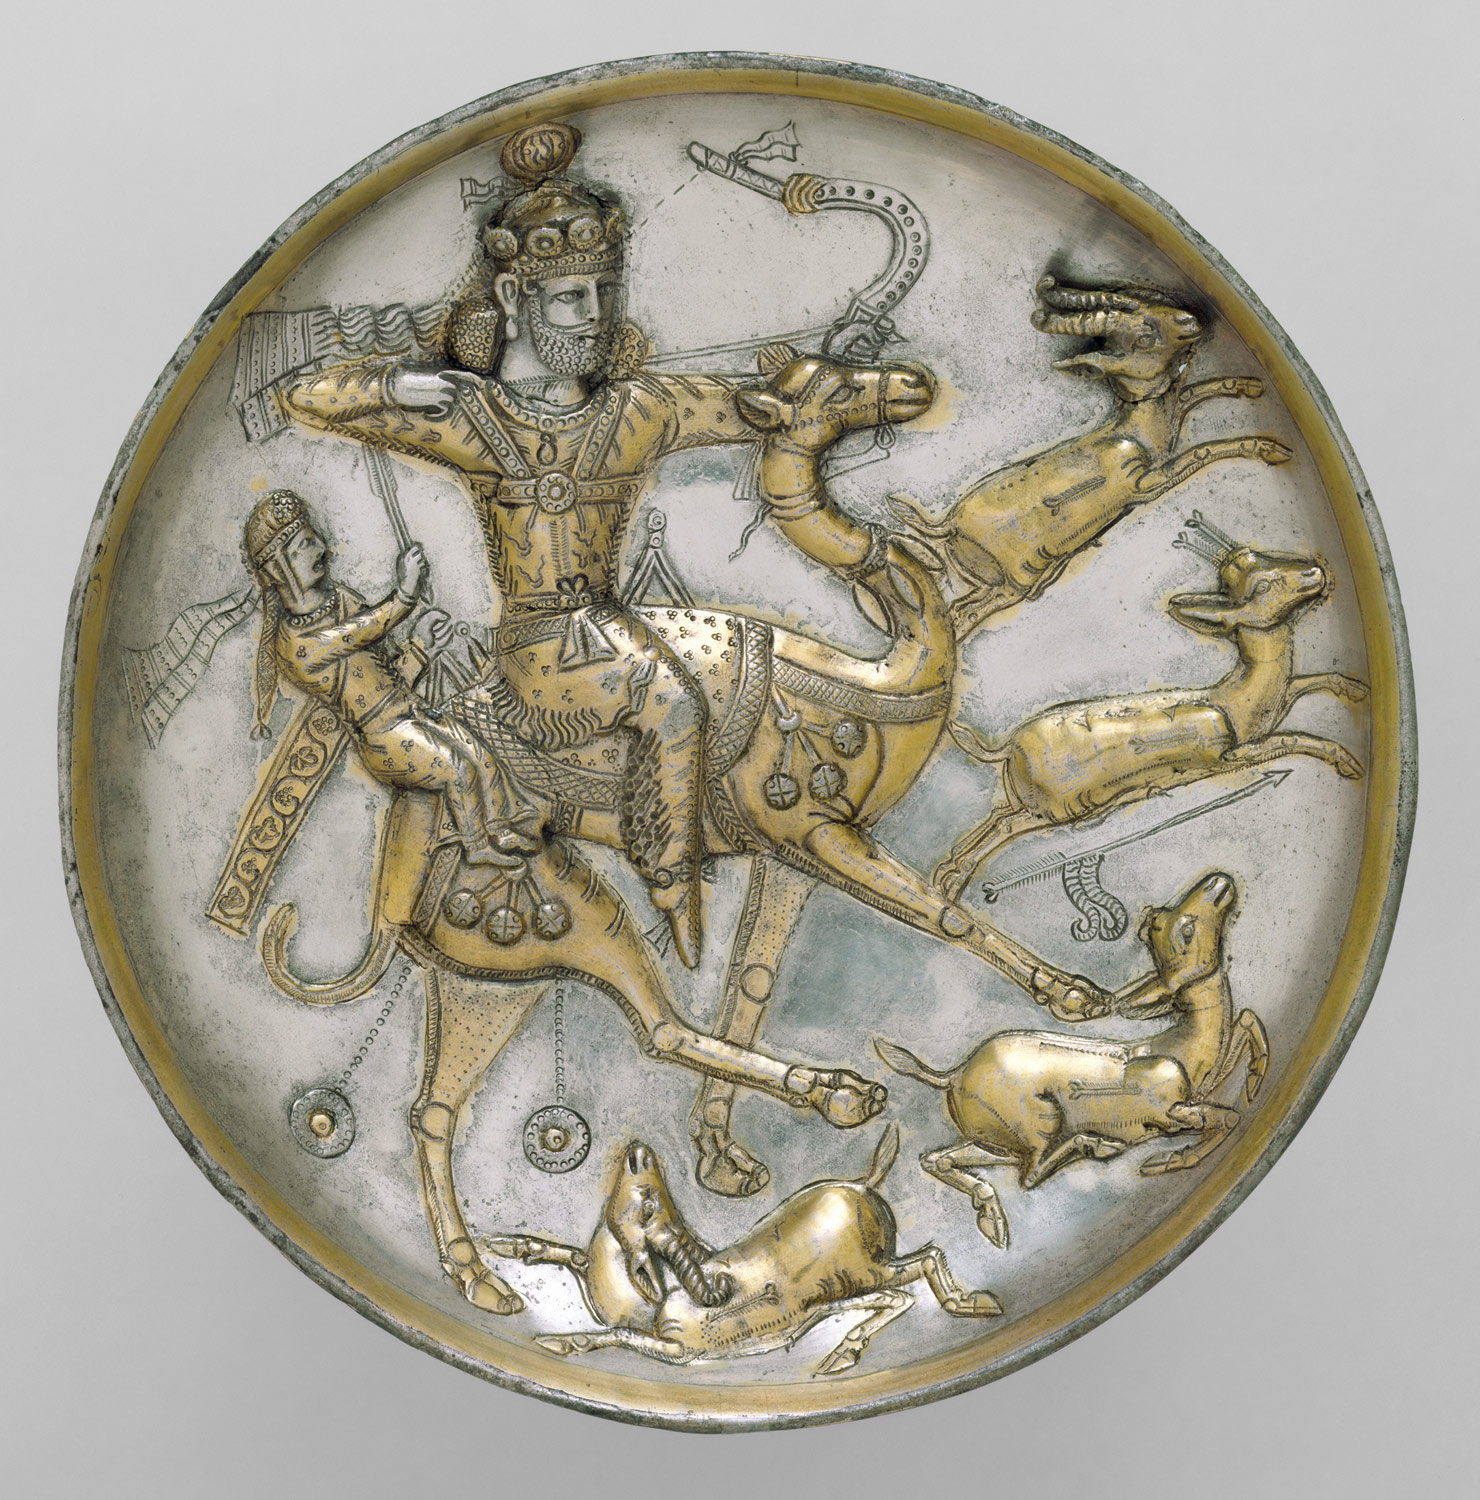 Plate with a hunting scene from the tale of Bahram Gur and Azadeh, c. 5th century, Sasanian, silver, mercury gilding, 4.11 cm high and 20.1 cm diameter (The Metropolitan Museum of Art, New York)